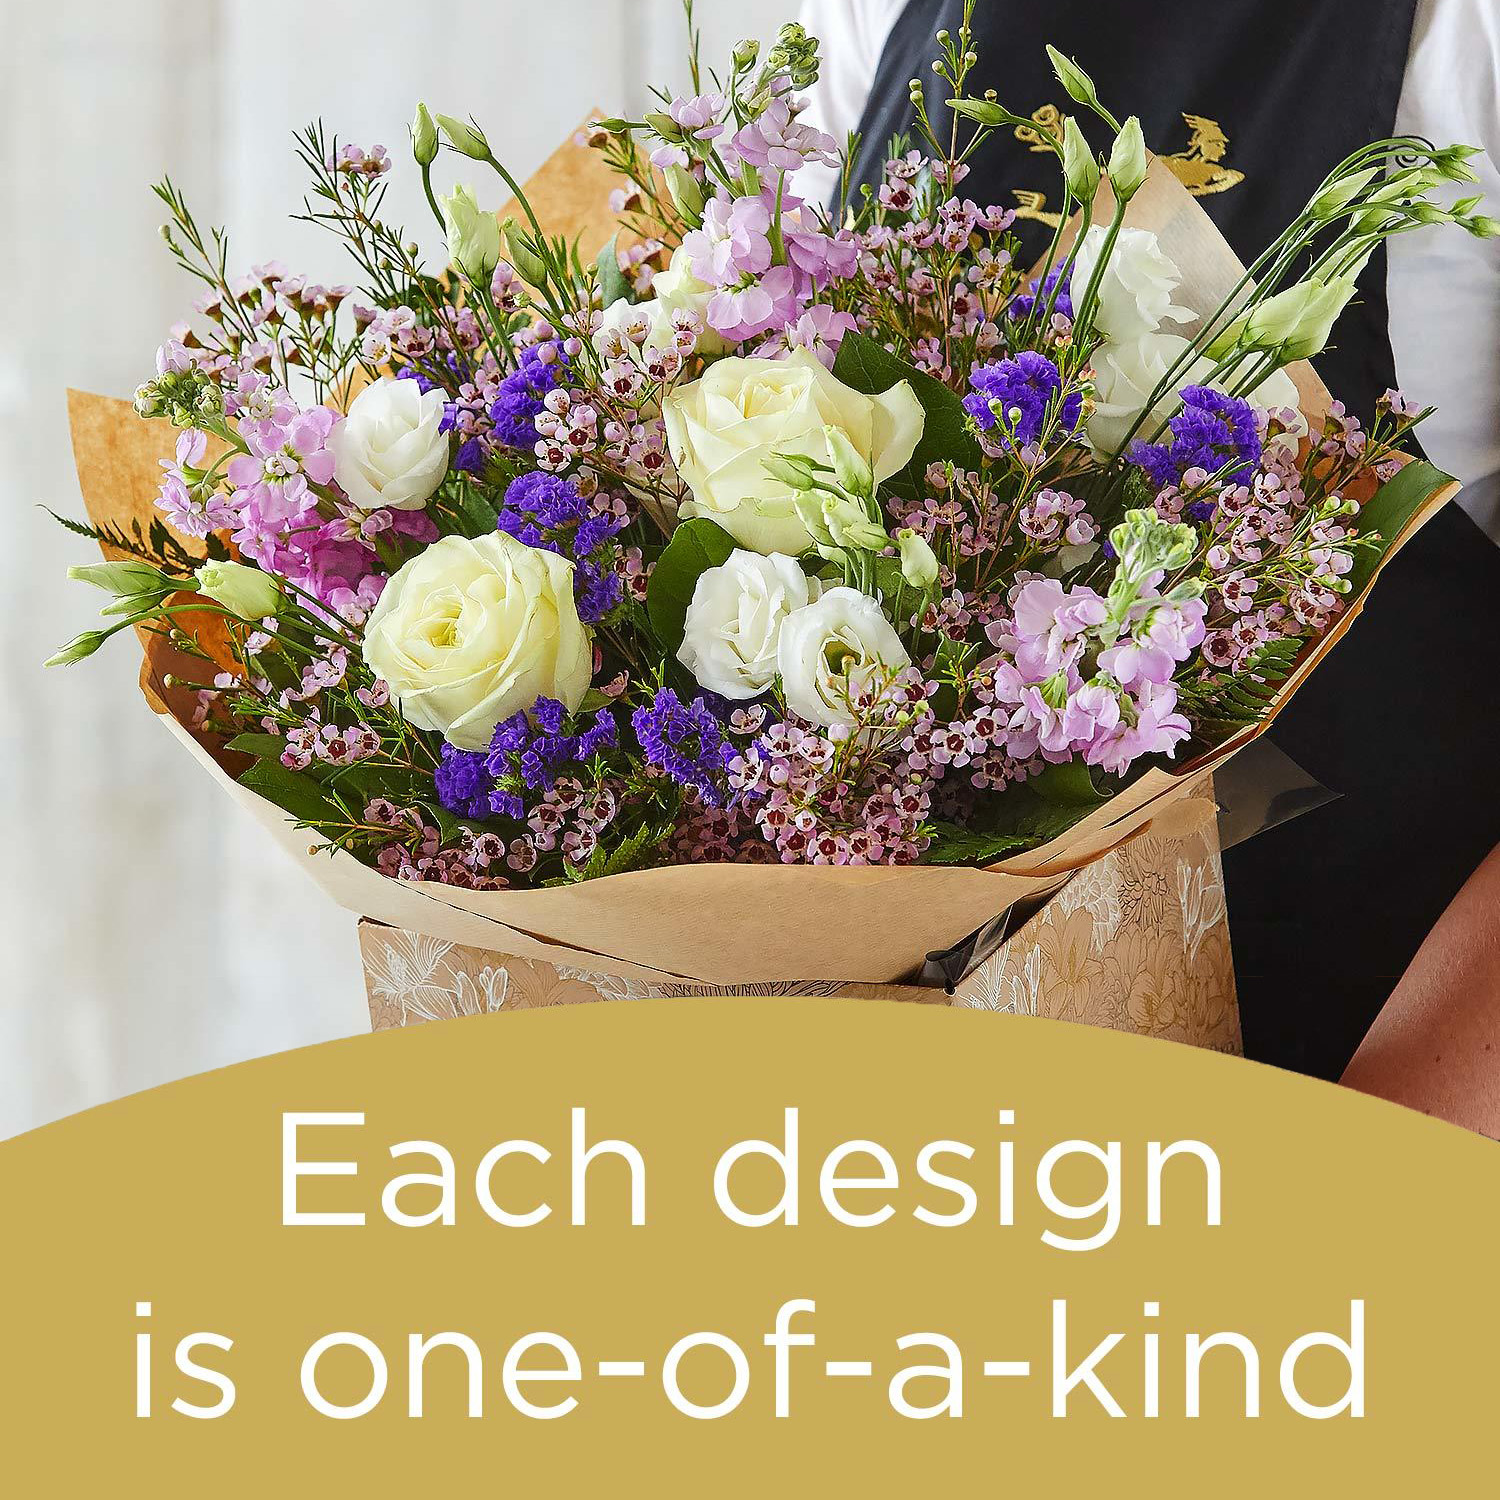 Bright Hand-tied bouquet made with the finest flowers